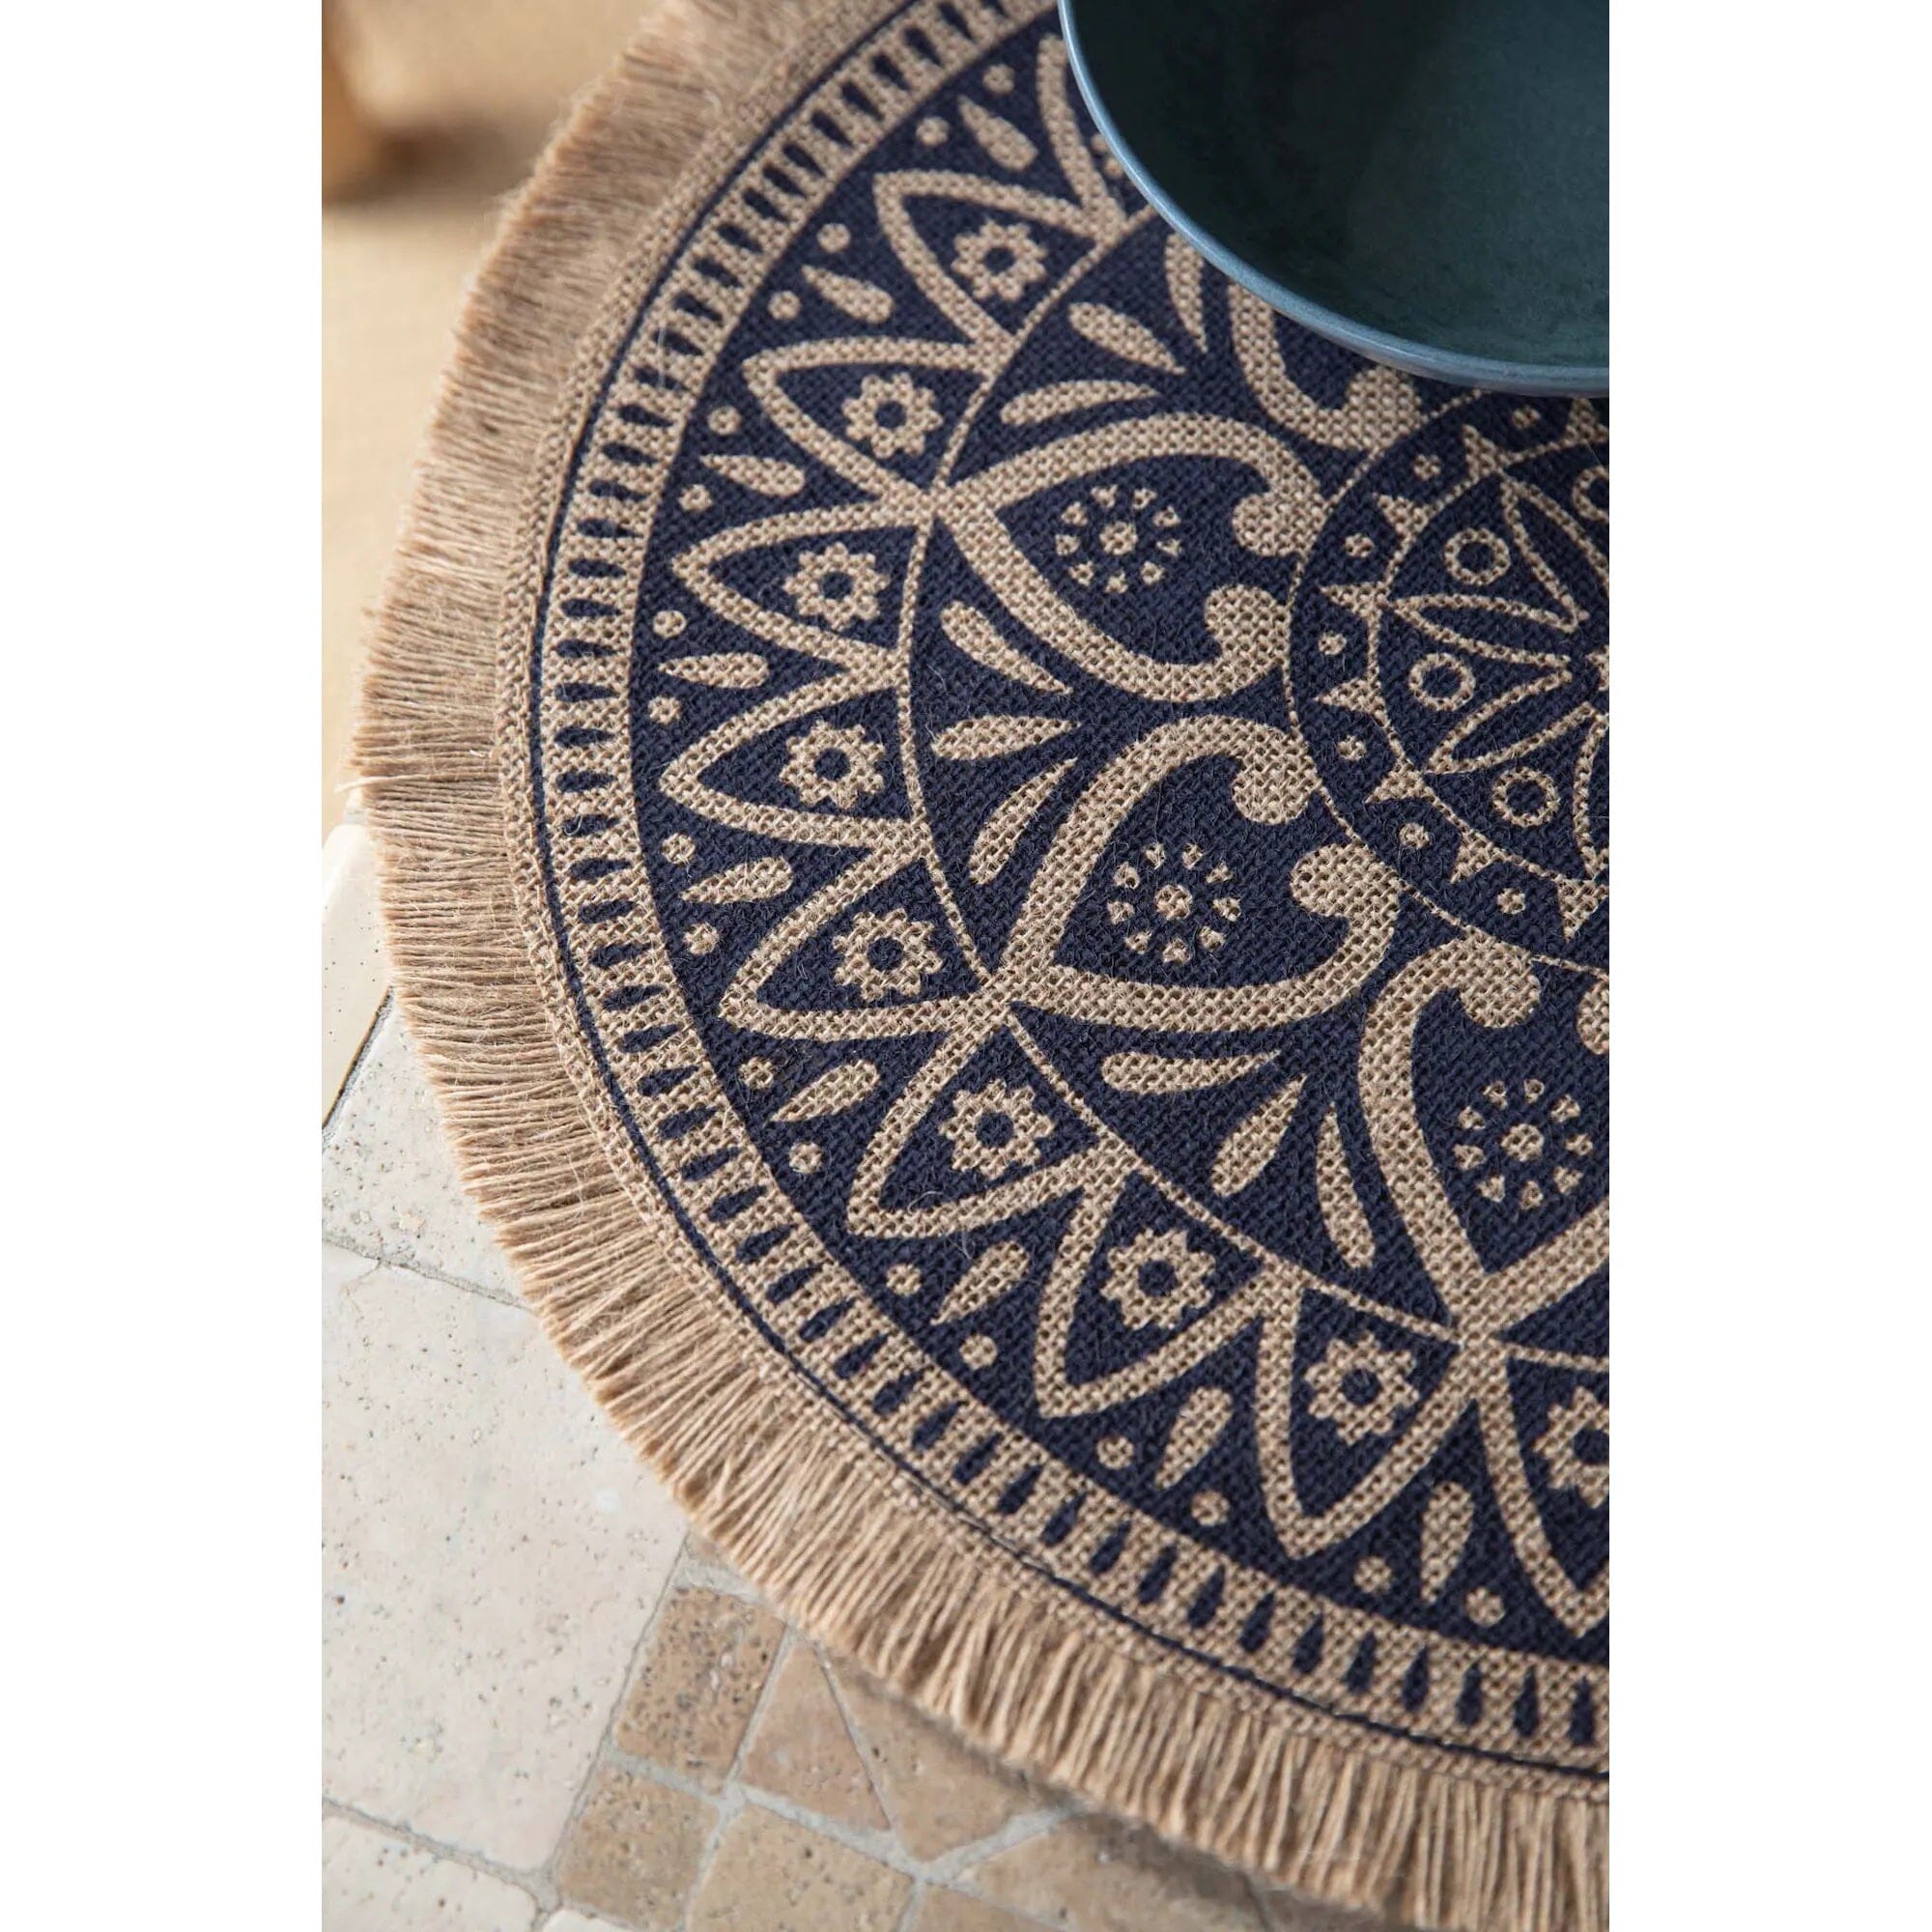 Kitchen Craft place mats. Elaborate blue mandala patterns combine with natural hessian on these Creative Tops jute placemats.